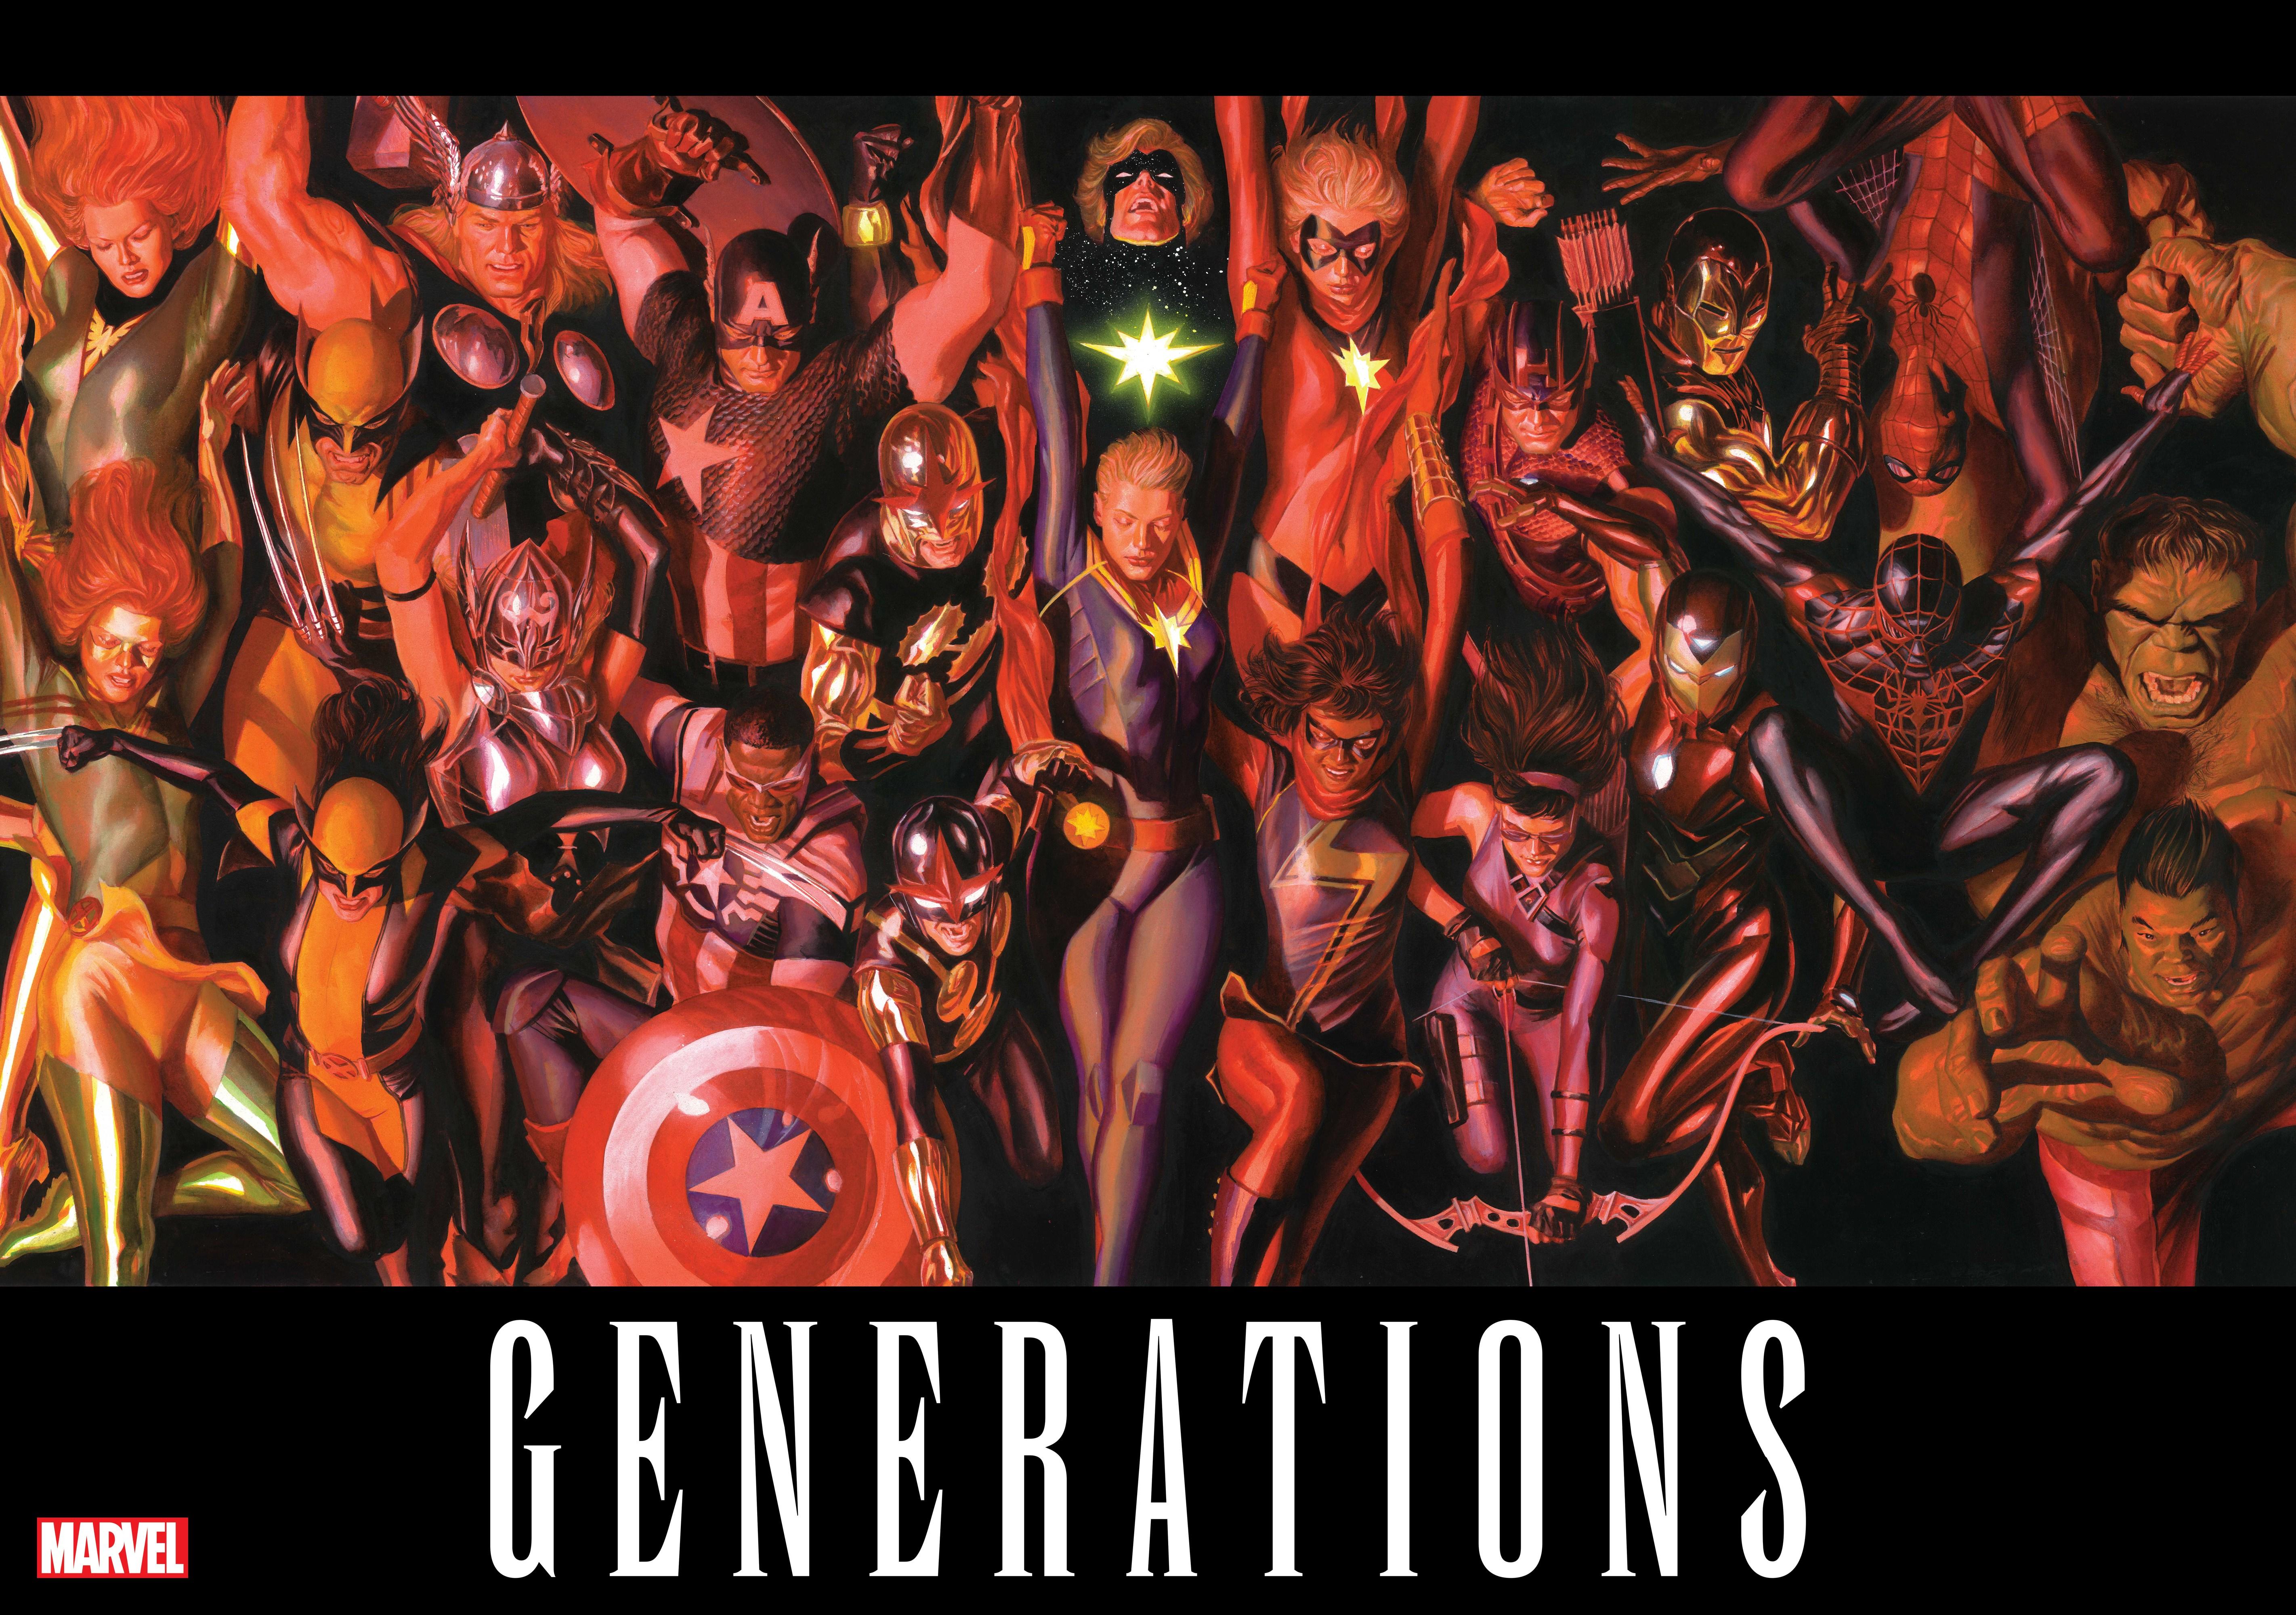 Compare and Contrast Marvel's Legacy Heroes with Generations